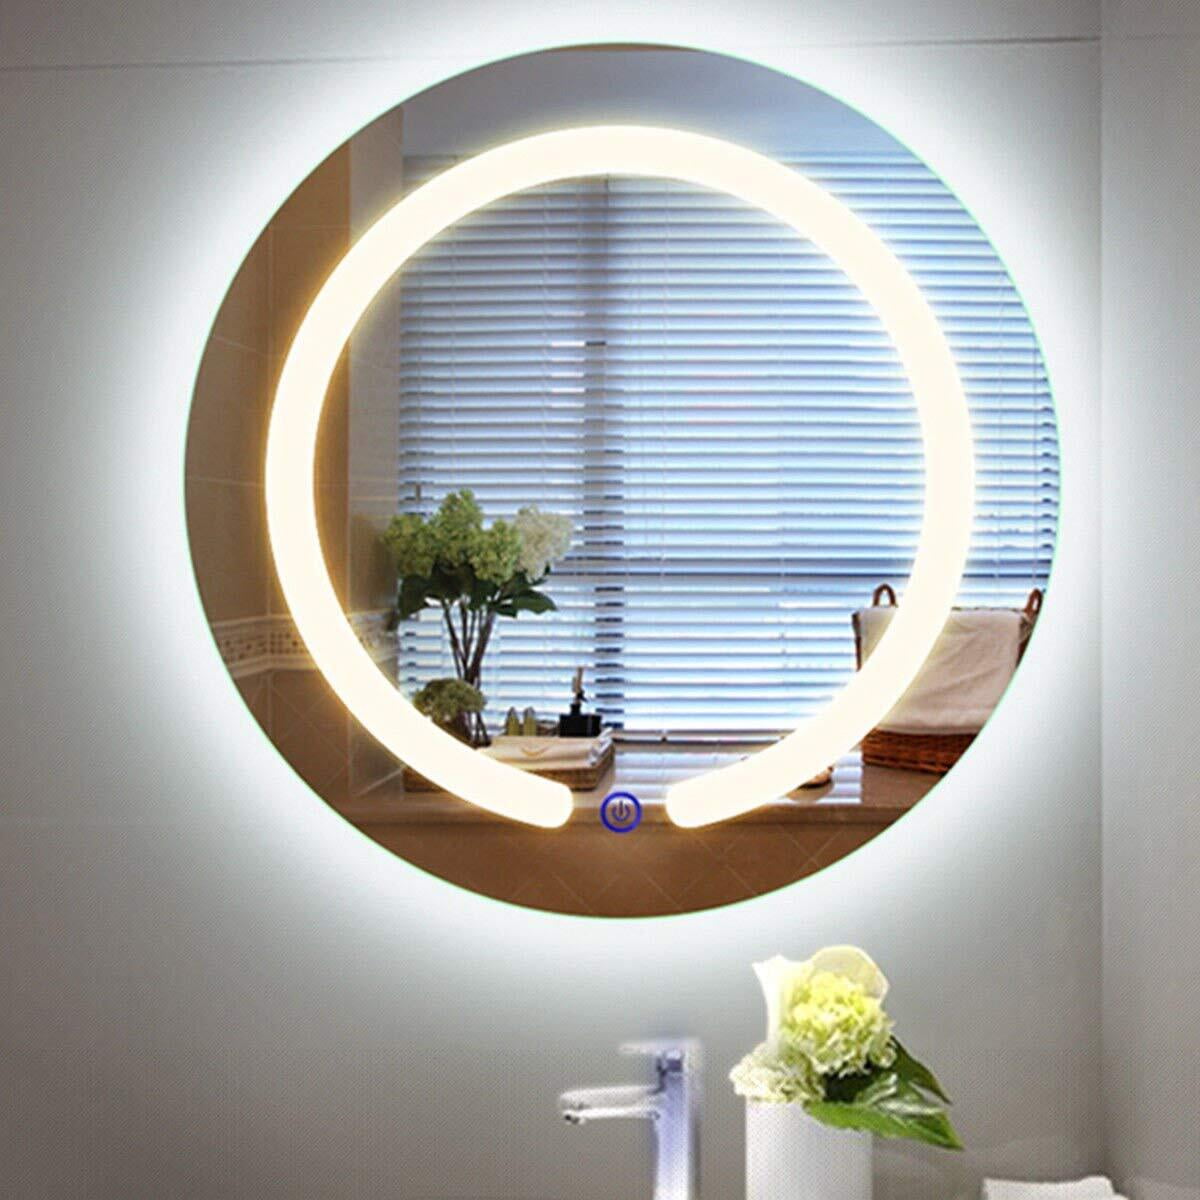 Rounded LED Mirror with Sensor Lights - 10" Smart Touch Wall Mirror